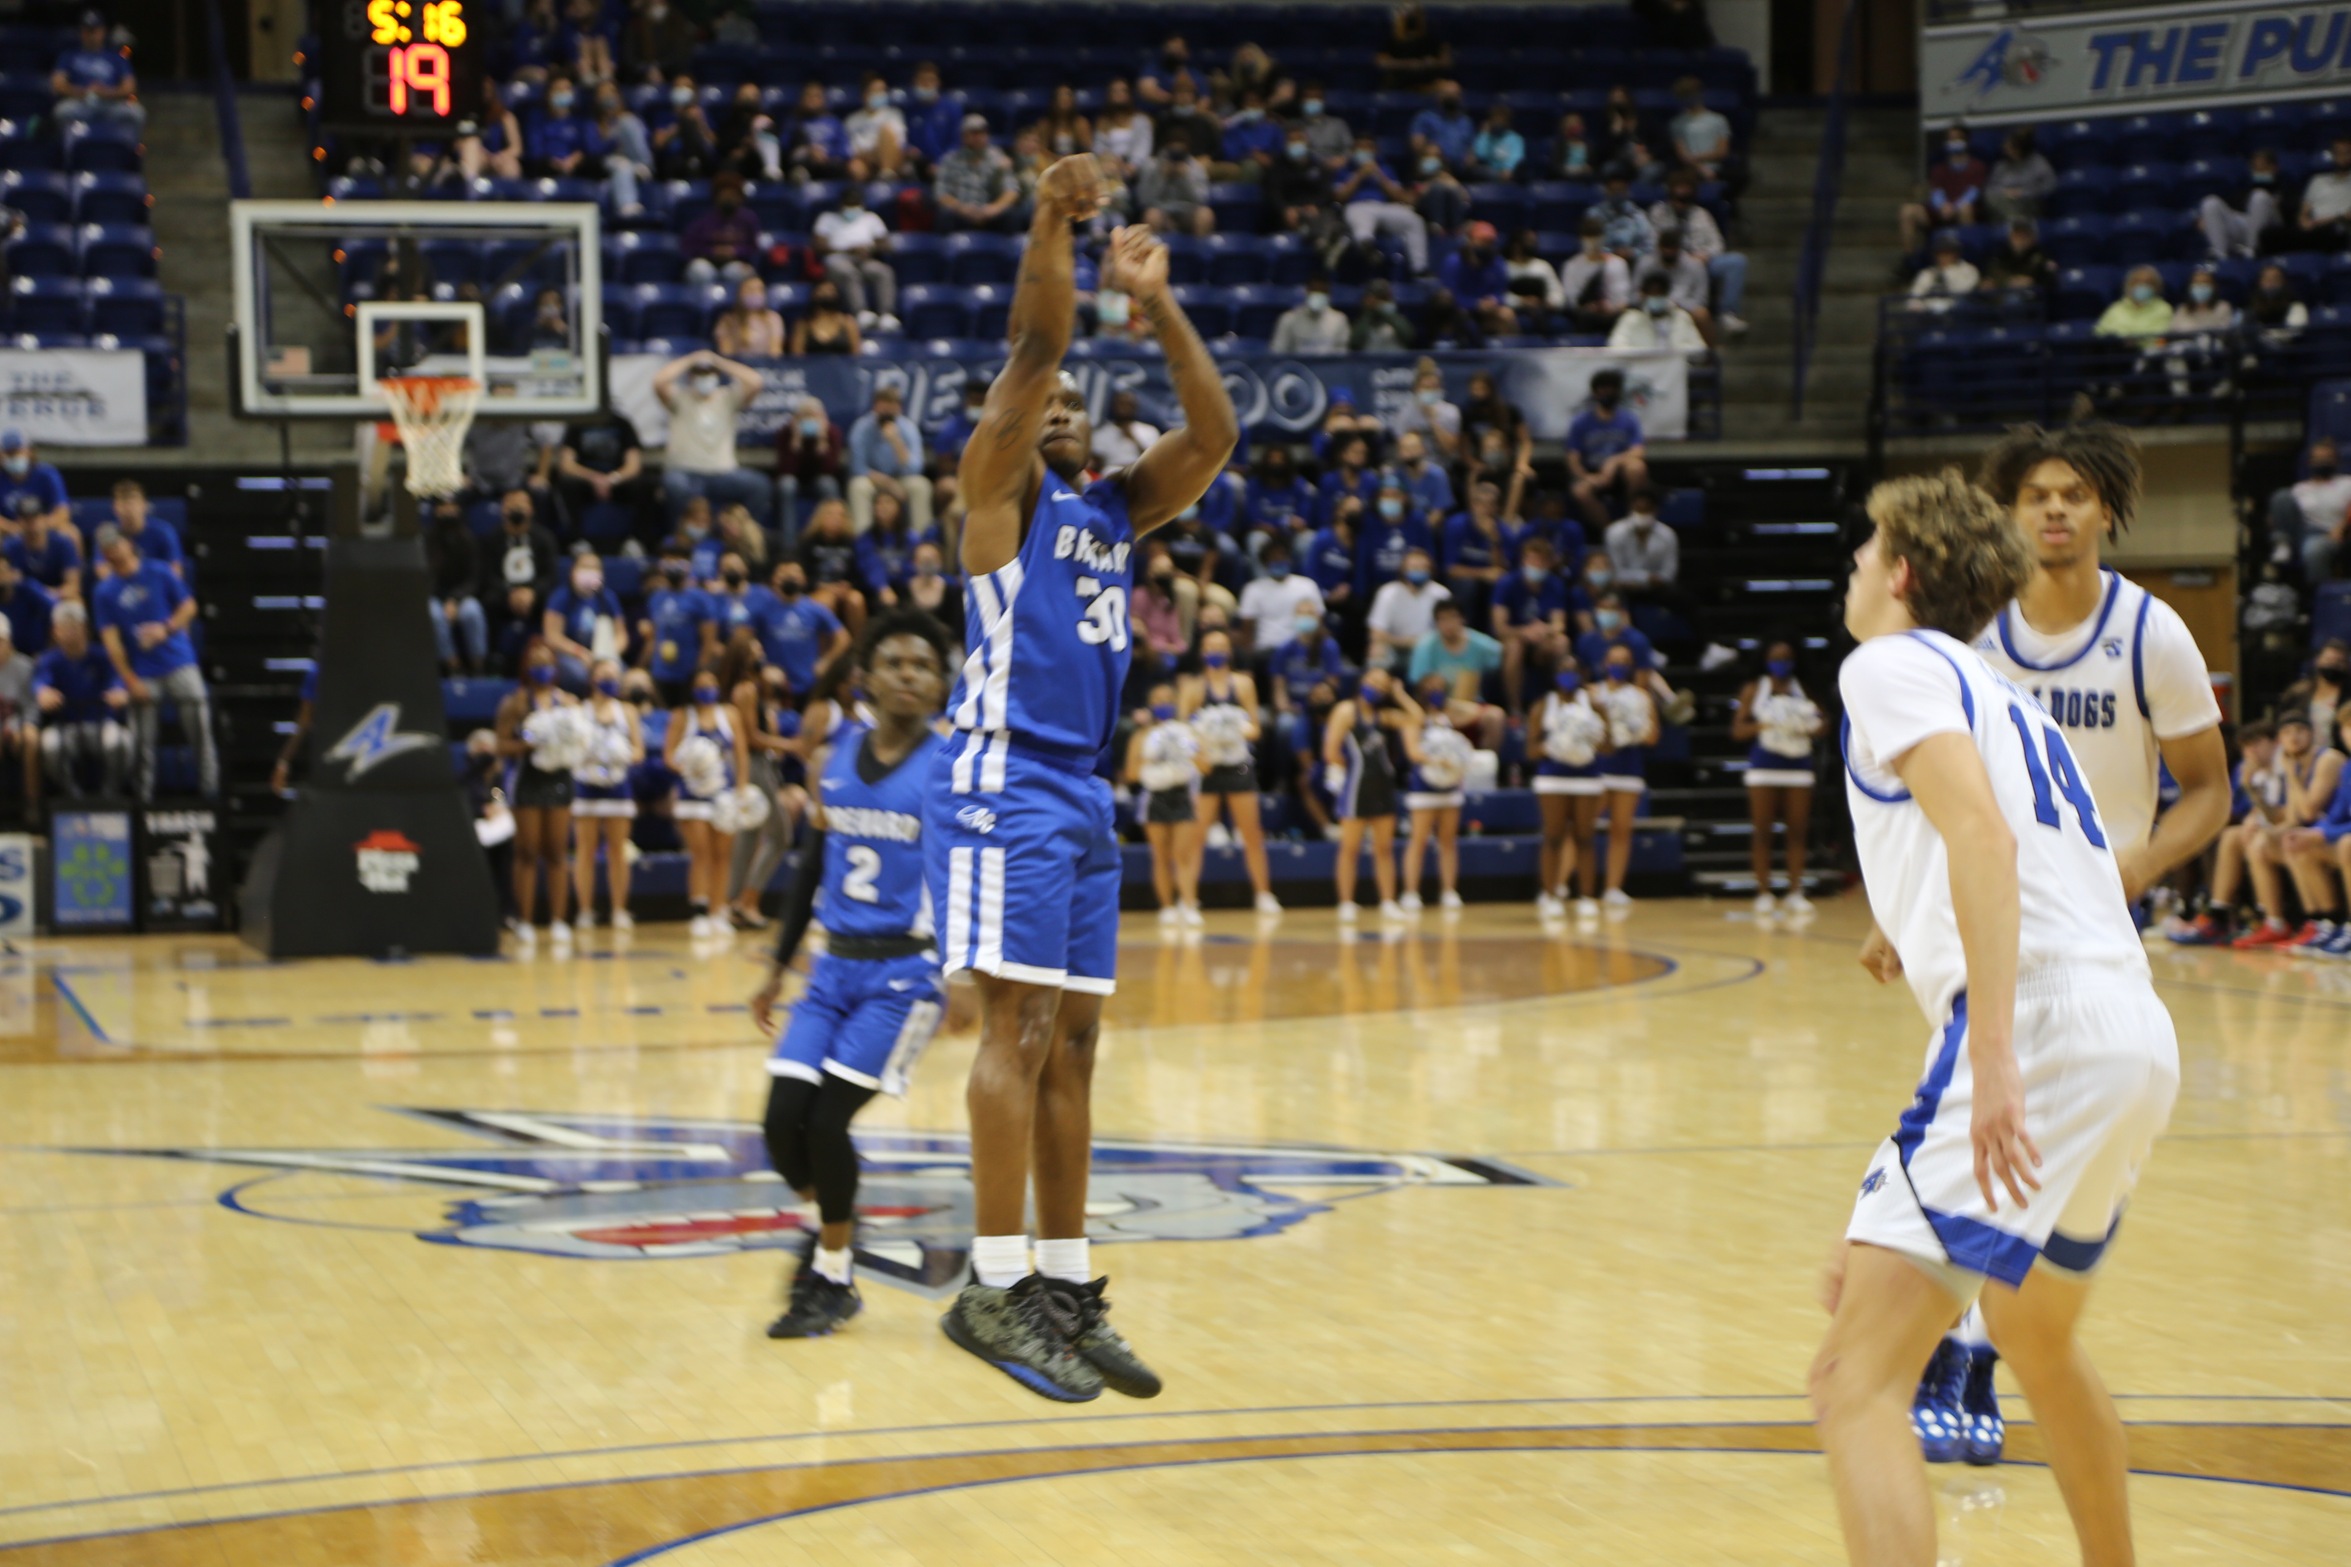 Chancey Watson tied for the team lead in points (11) and led all Tornados with six rebounds at UNCA